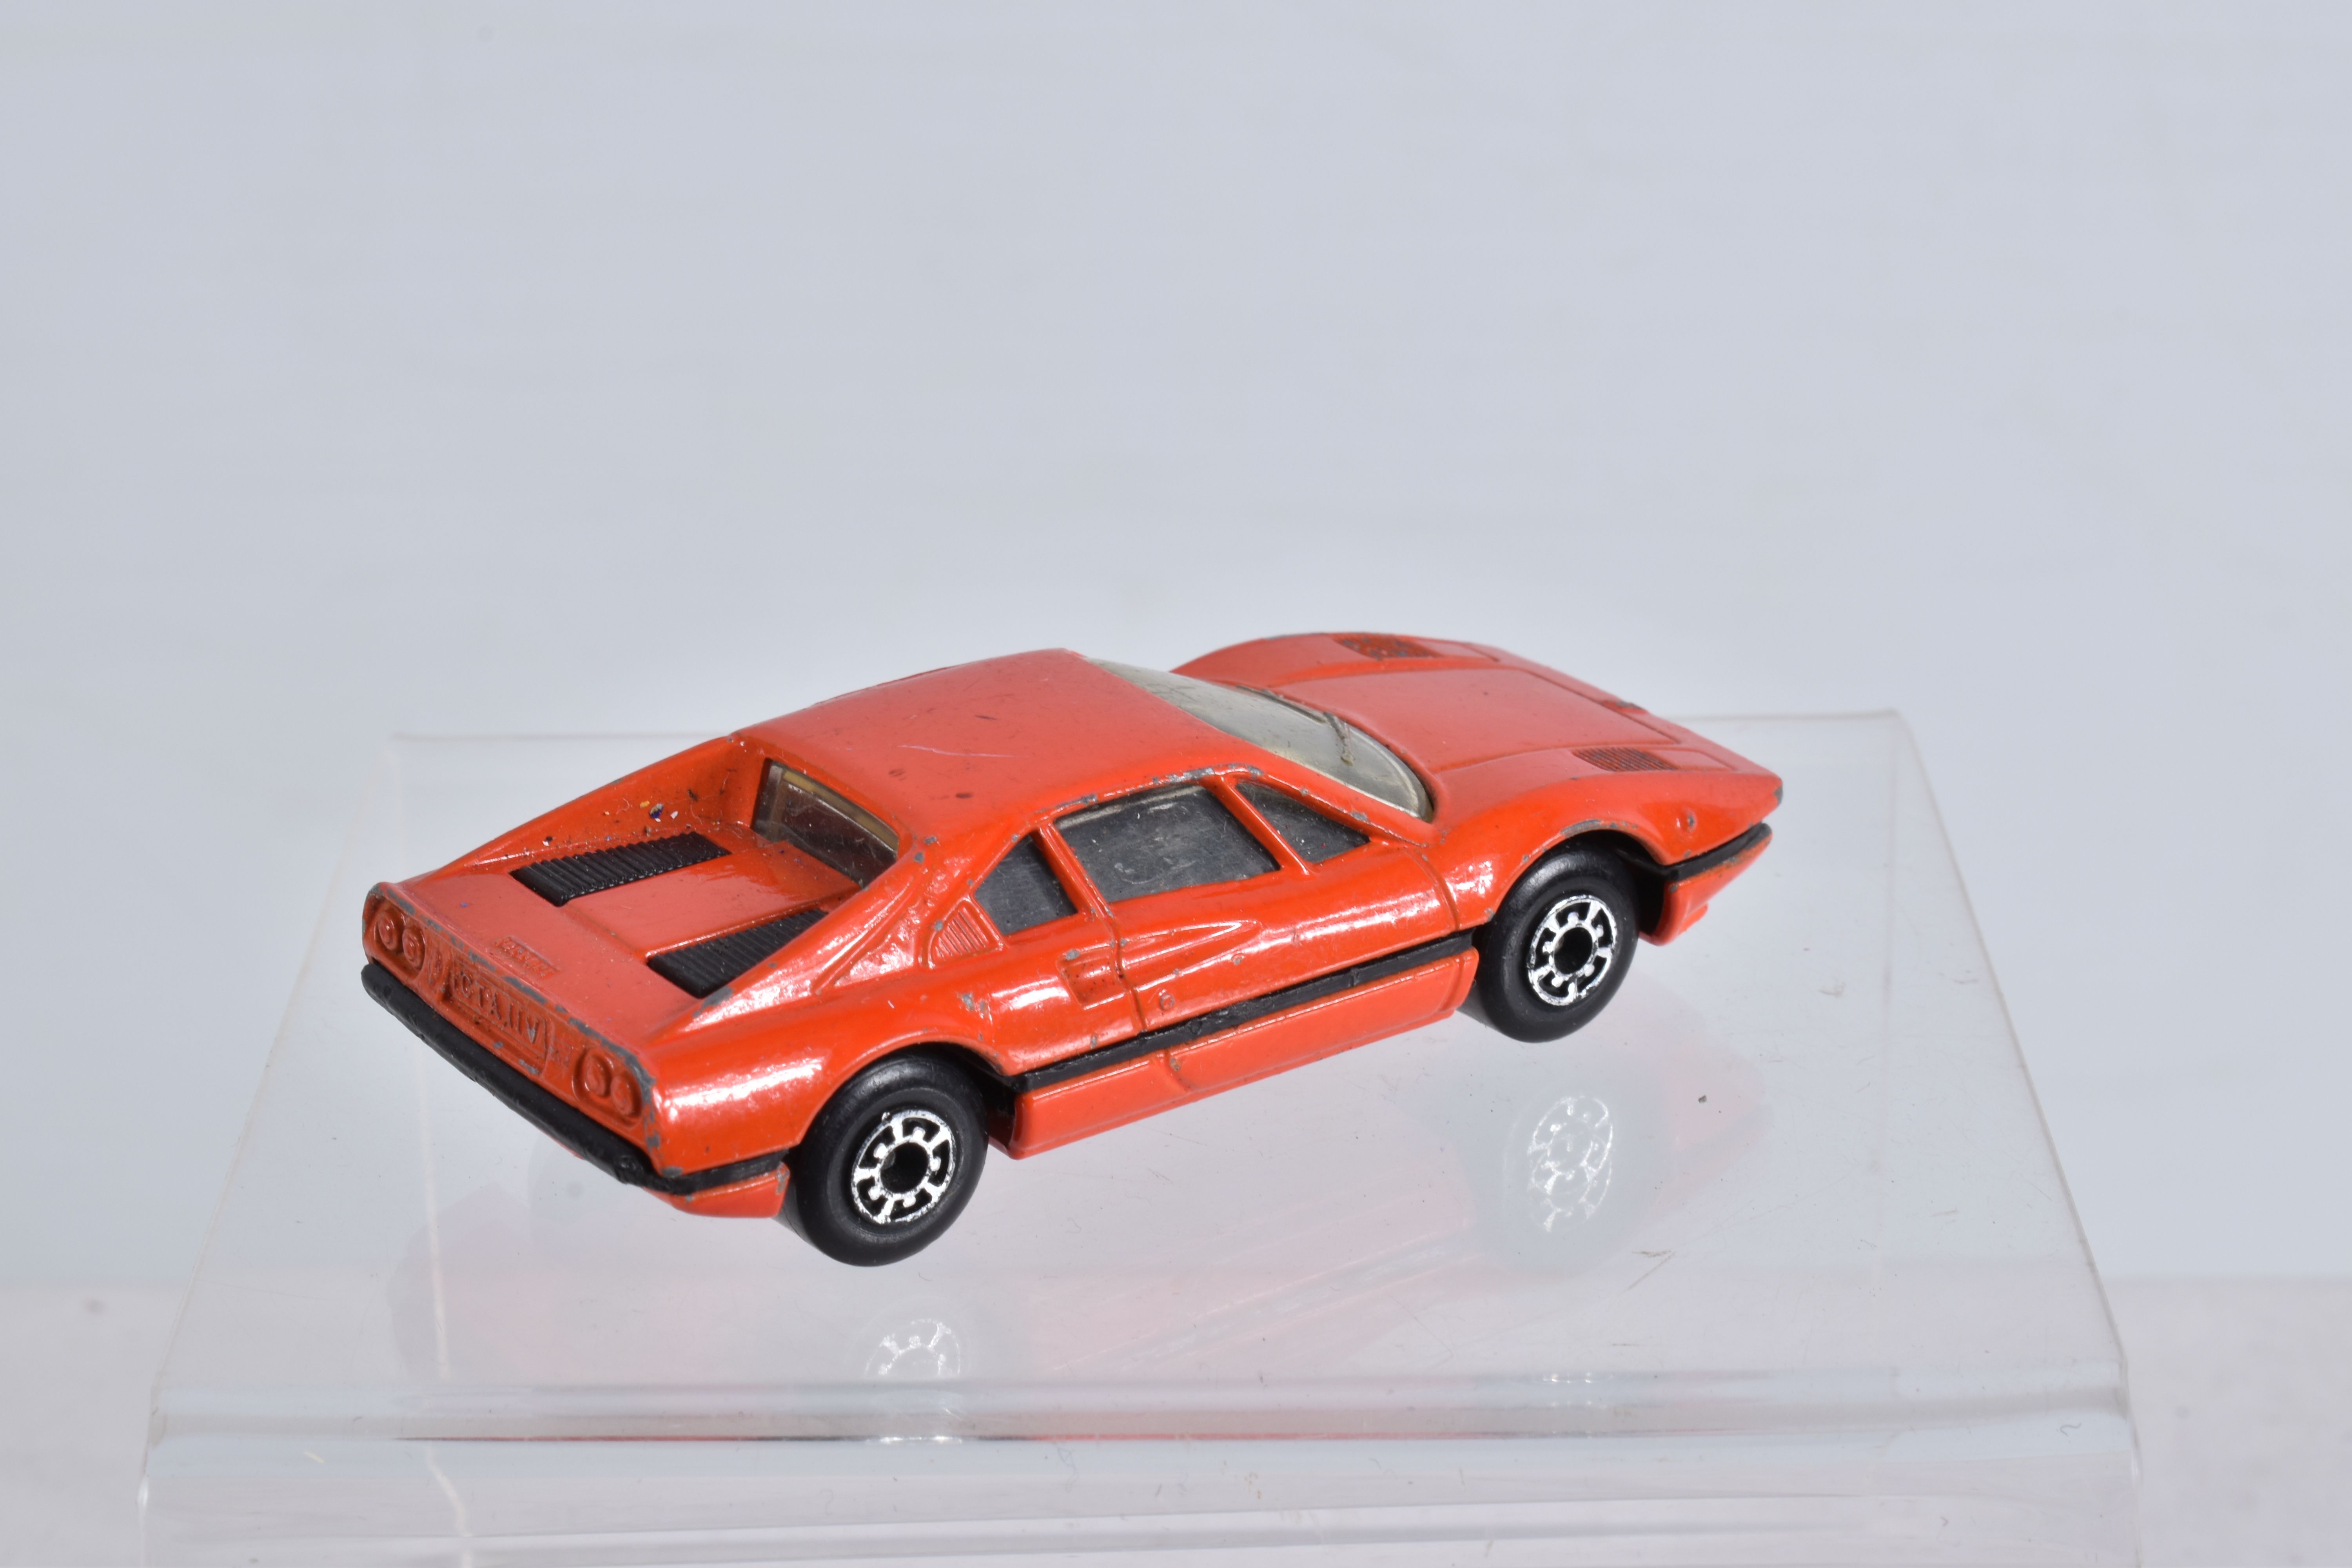 SEVEN BOXED MATCHBOX SUPERFAST DIECAST MODEL VEHICLES, the first a new no. 65 Airport Coach, - Image 25 of 45